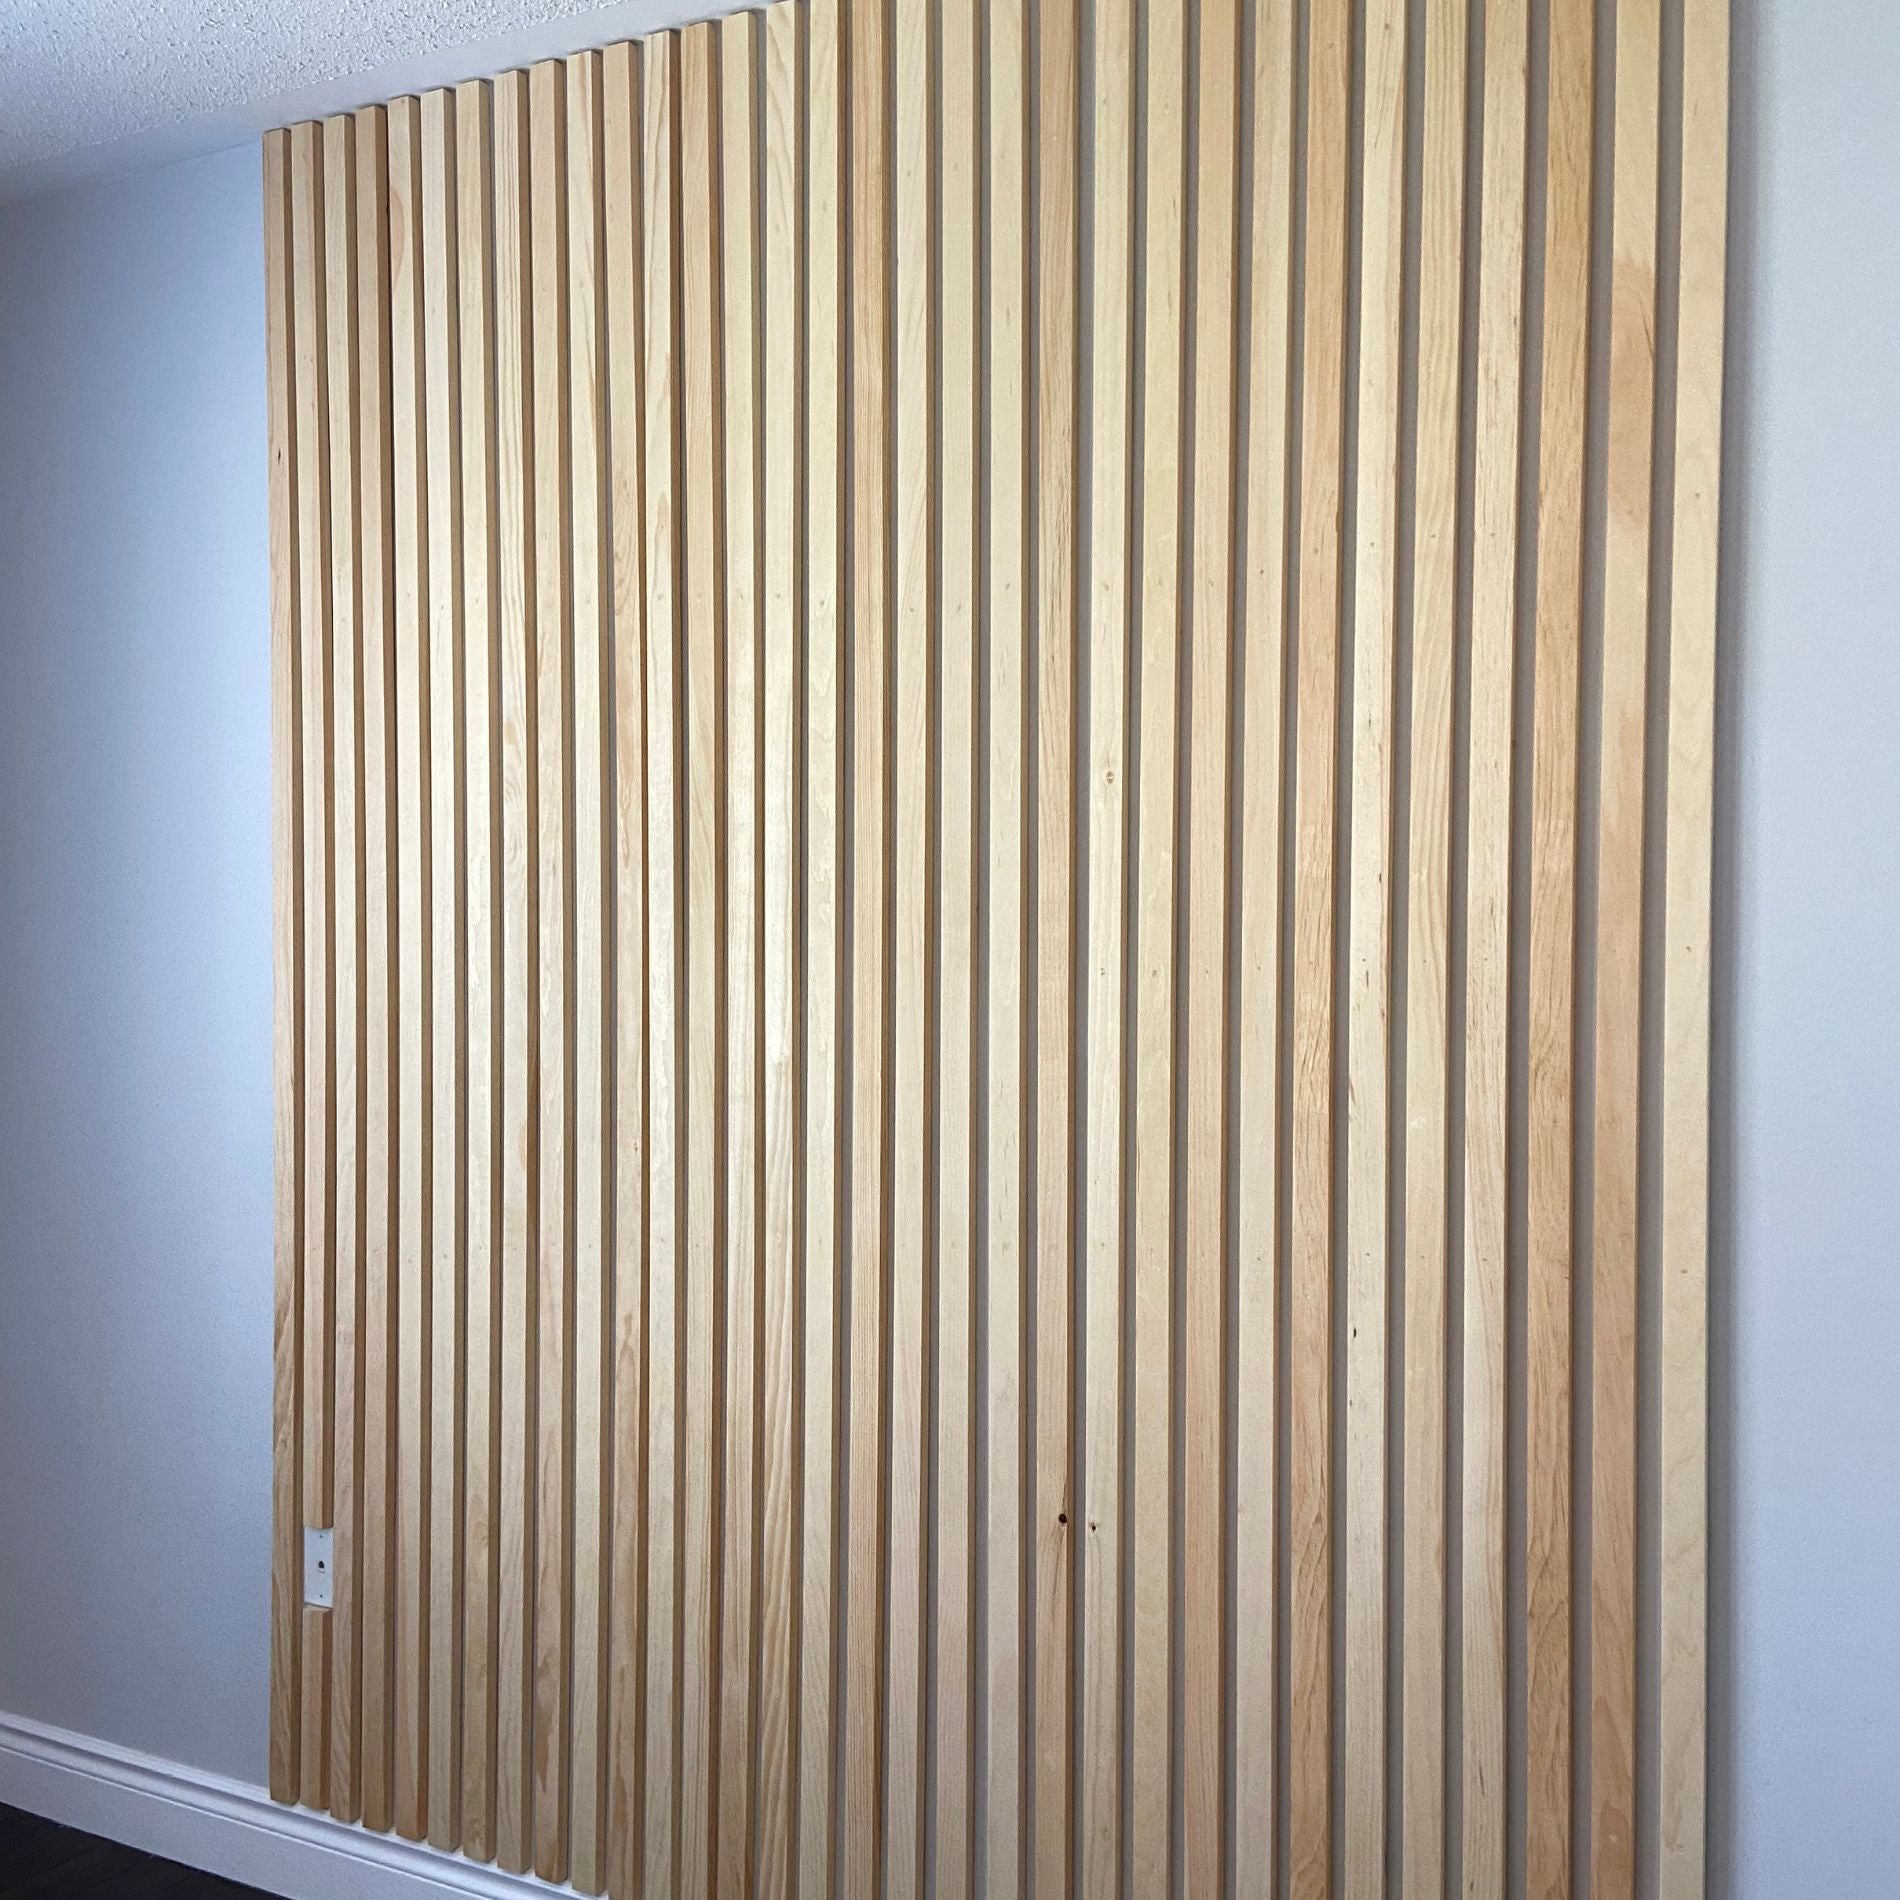 Angled view of final DIY wood slat project